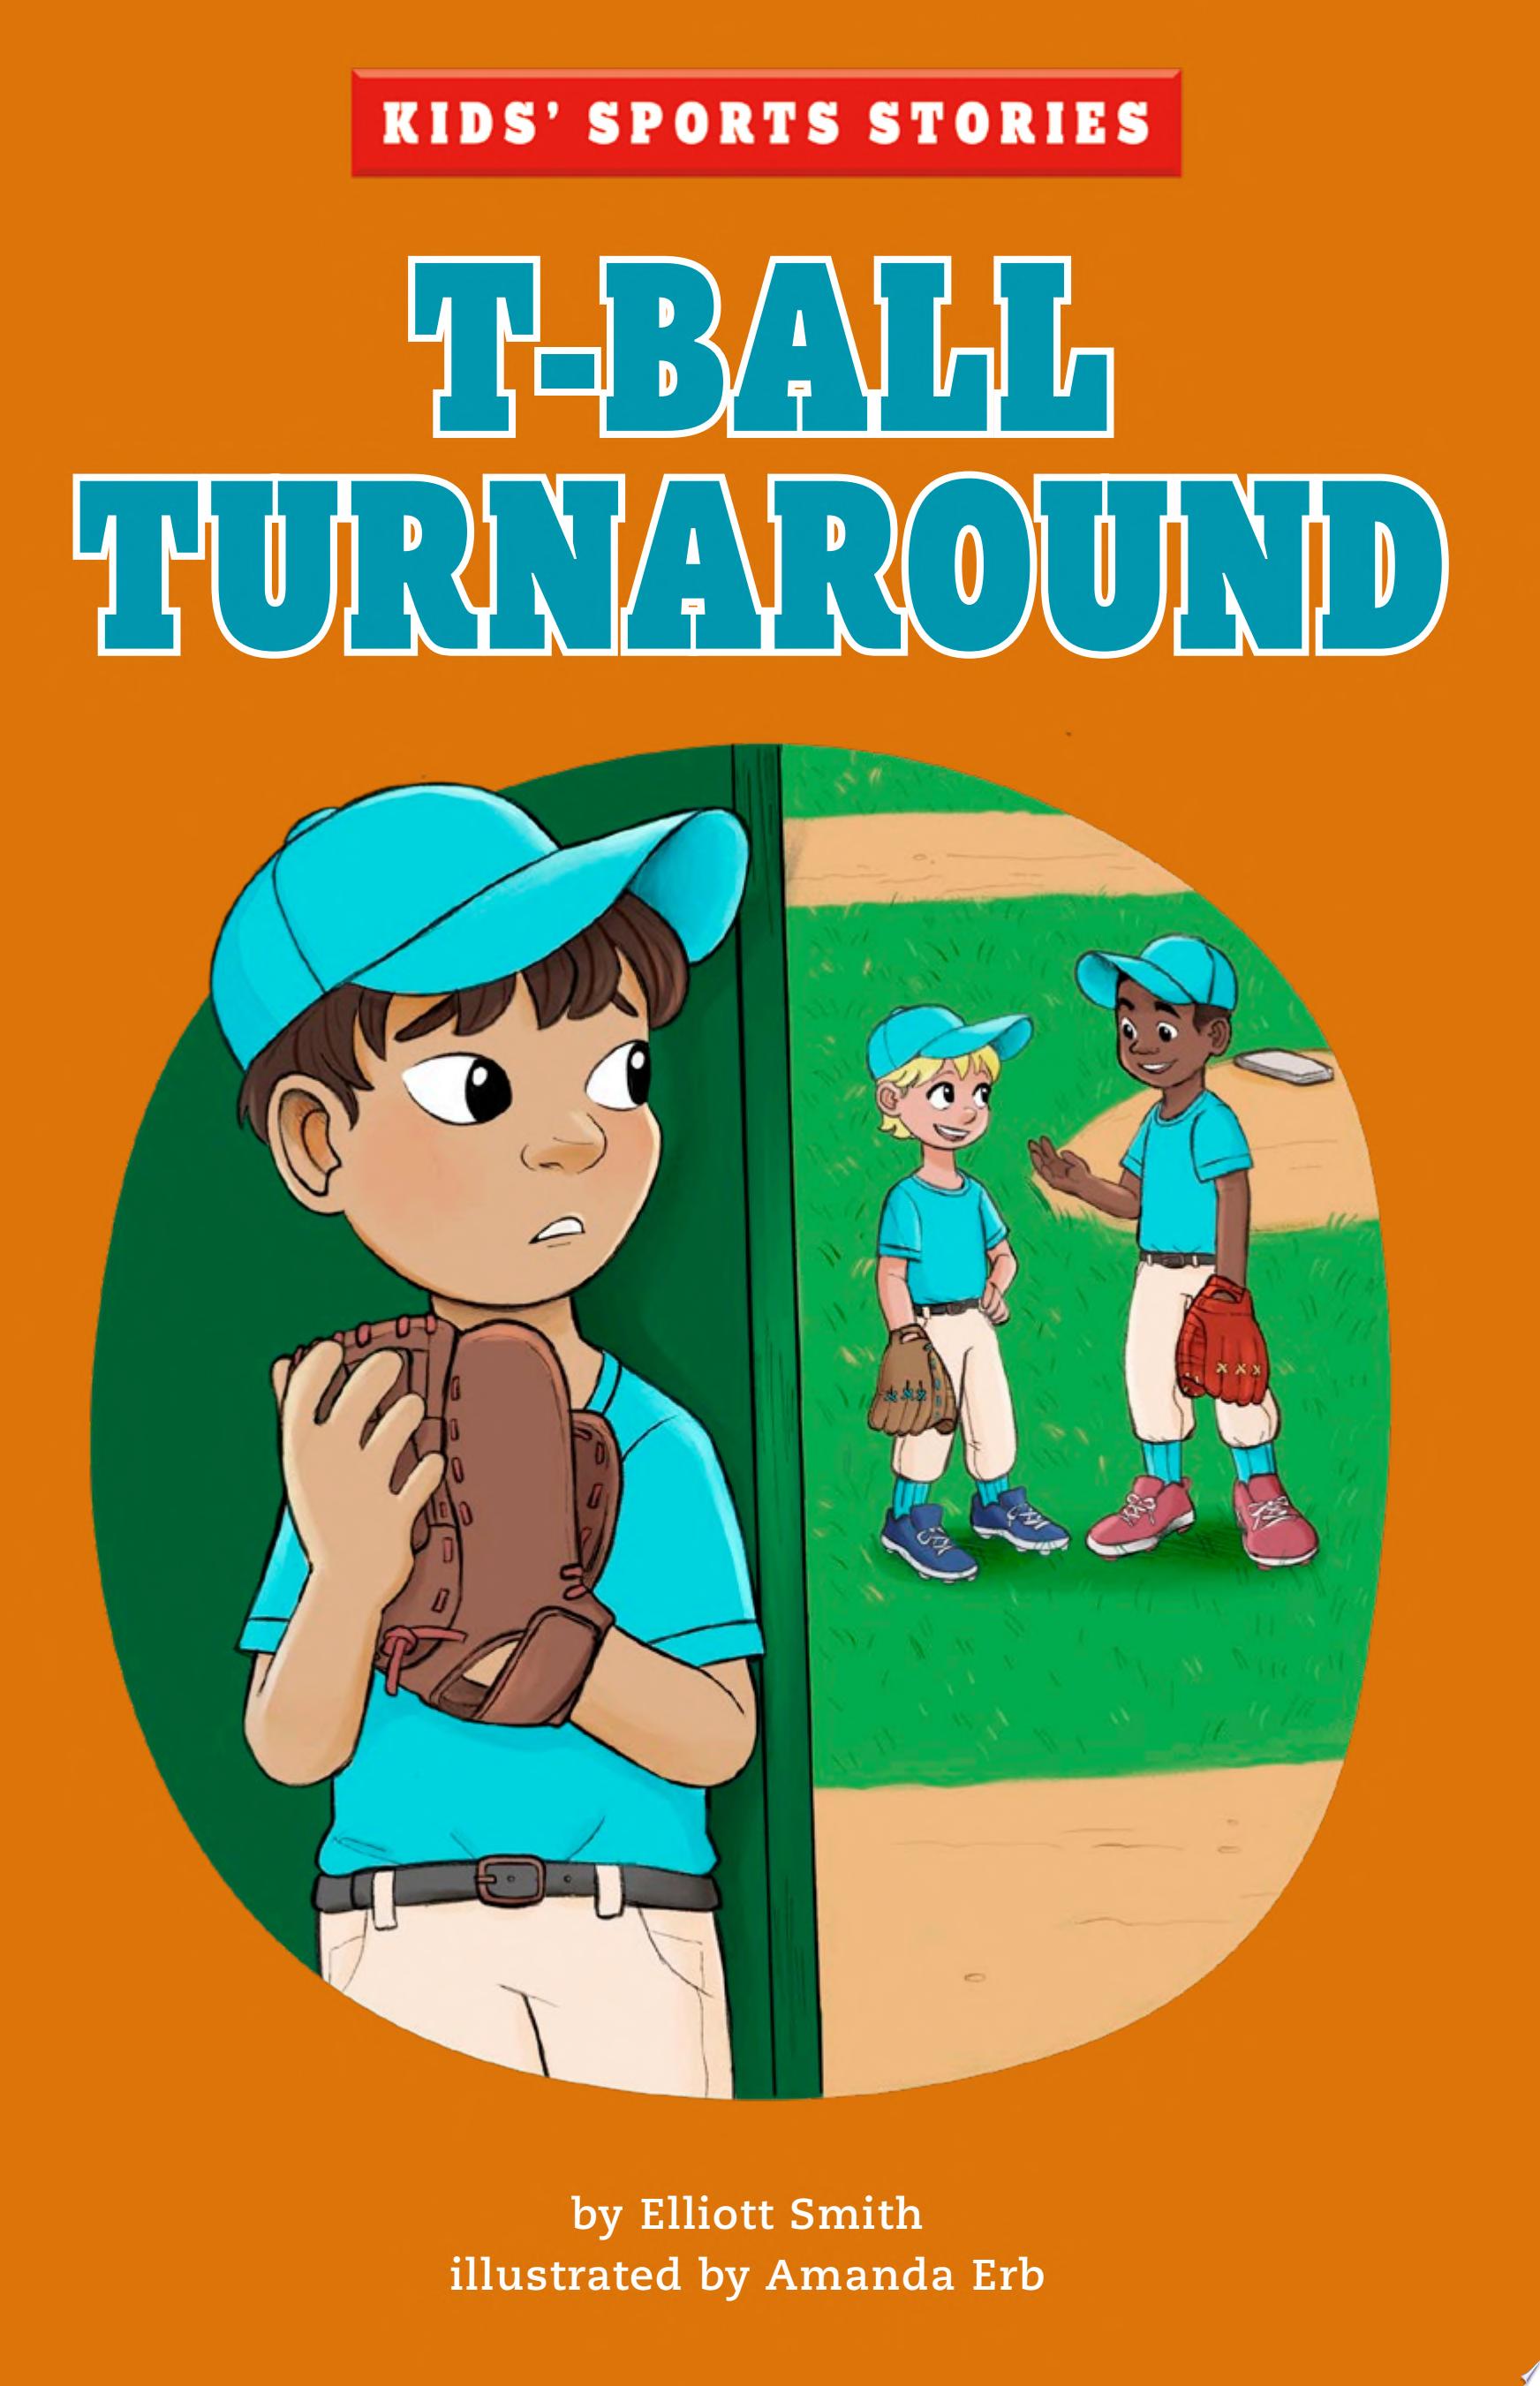 Image for "T-Ball Turnaround"